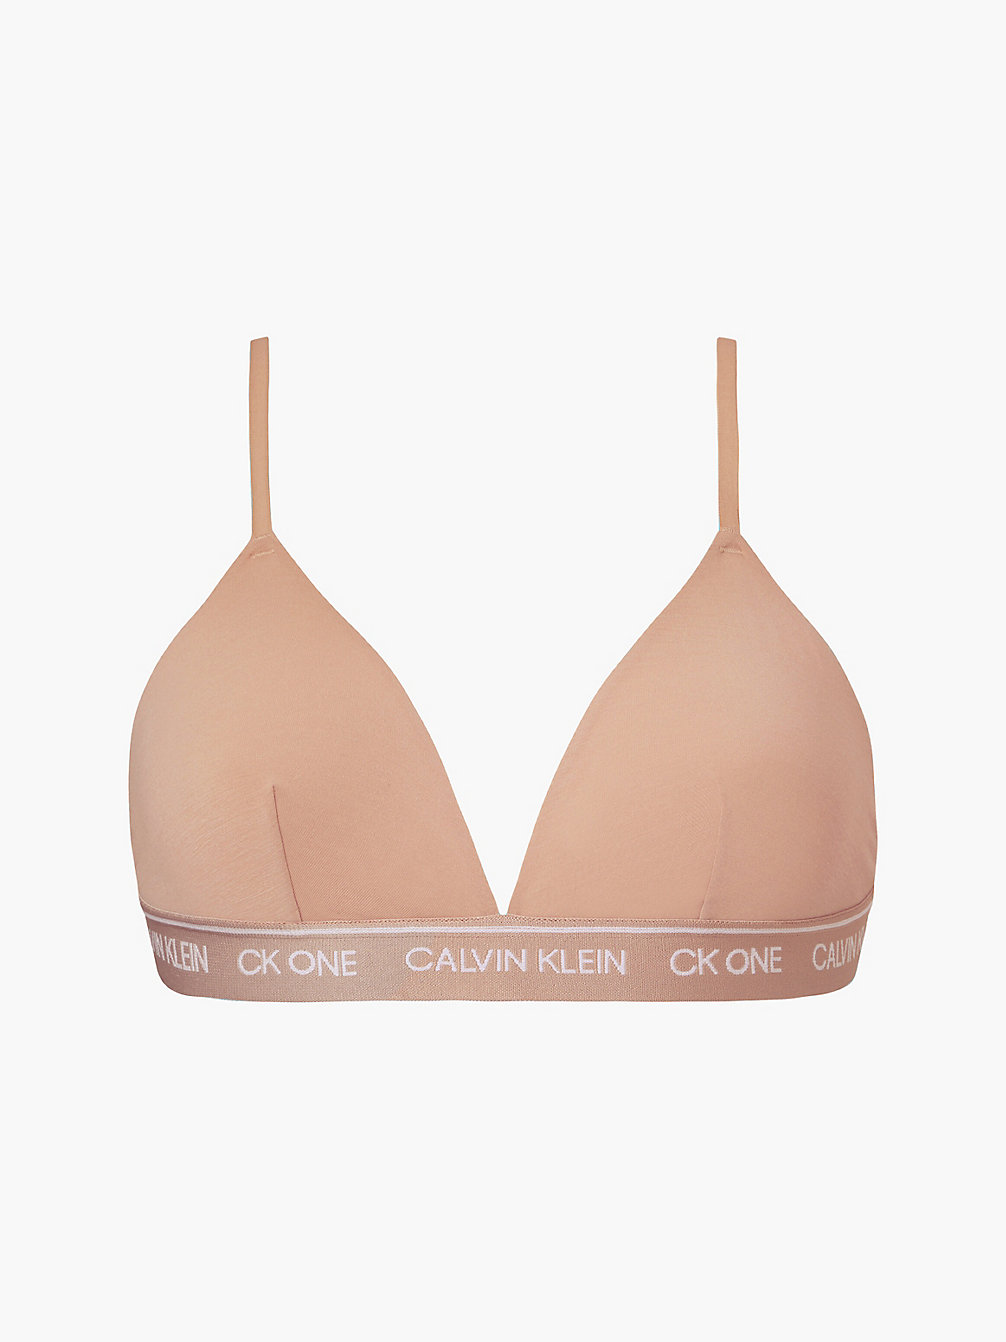 CLAY Triangle Bra - CK One Recycled undefined women Calvin Klein